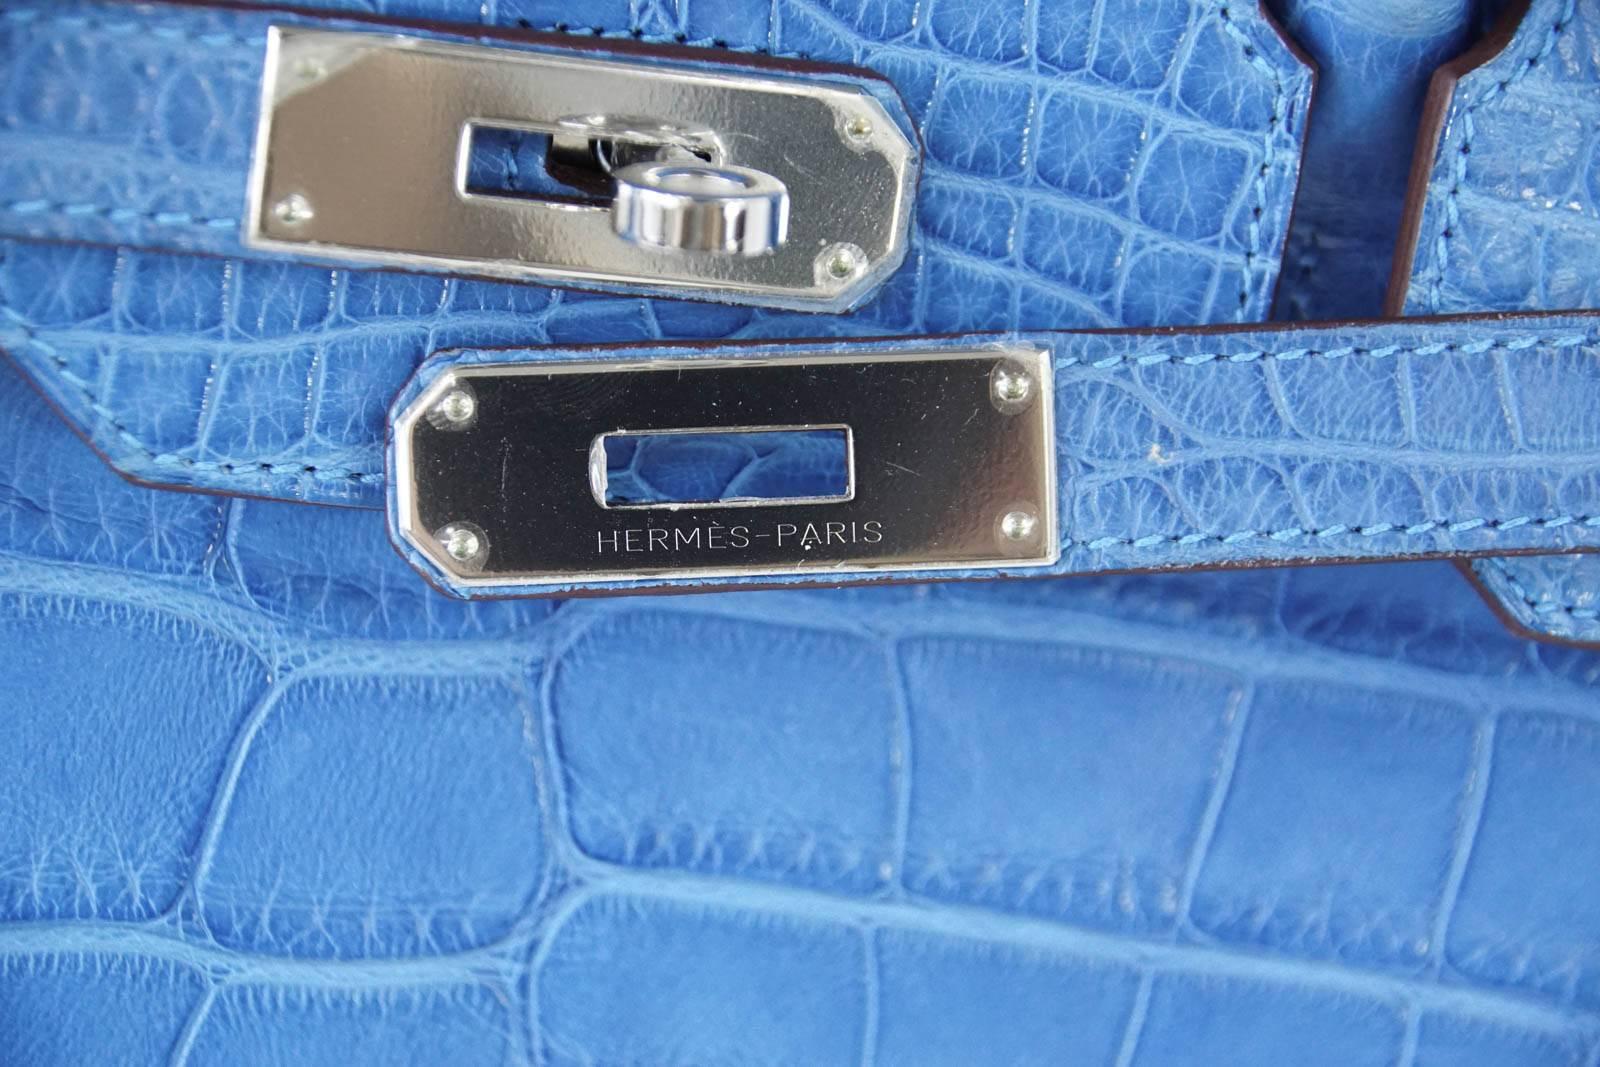 Guaranteed authentic Hermes Birkin 35 exquisite blue Mykonos in Alligator.
Cool with Palladium Hardware.
Plastic on hardware.
Very light natural wear marks on corners. 
Handles and body are mint. 
Interior has a light mark at base are on the side.